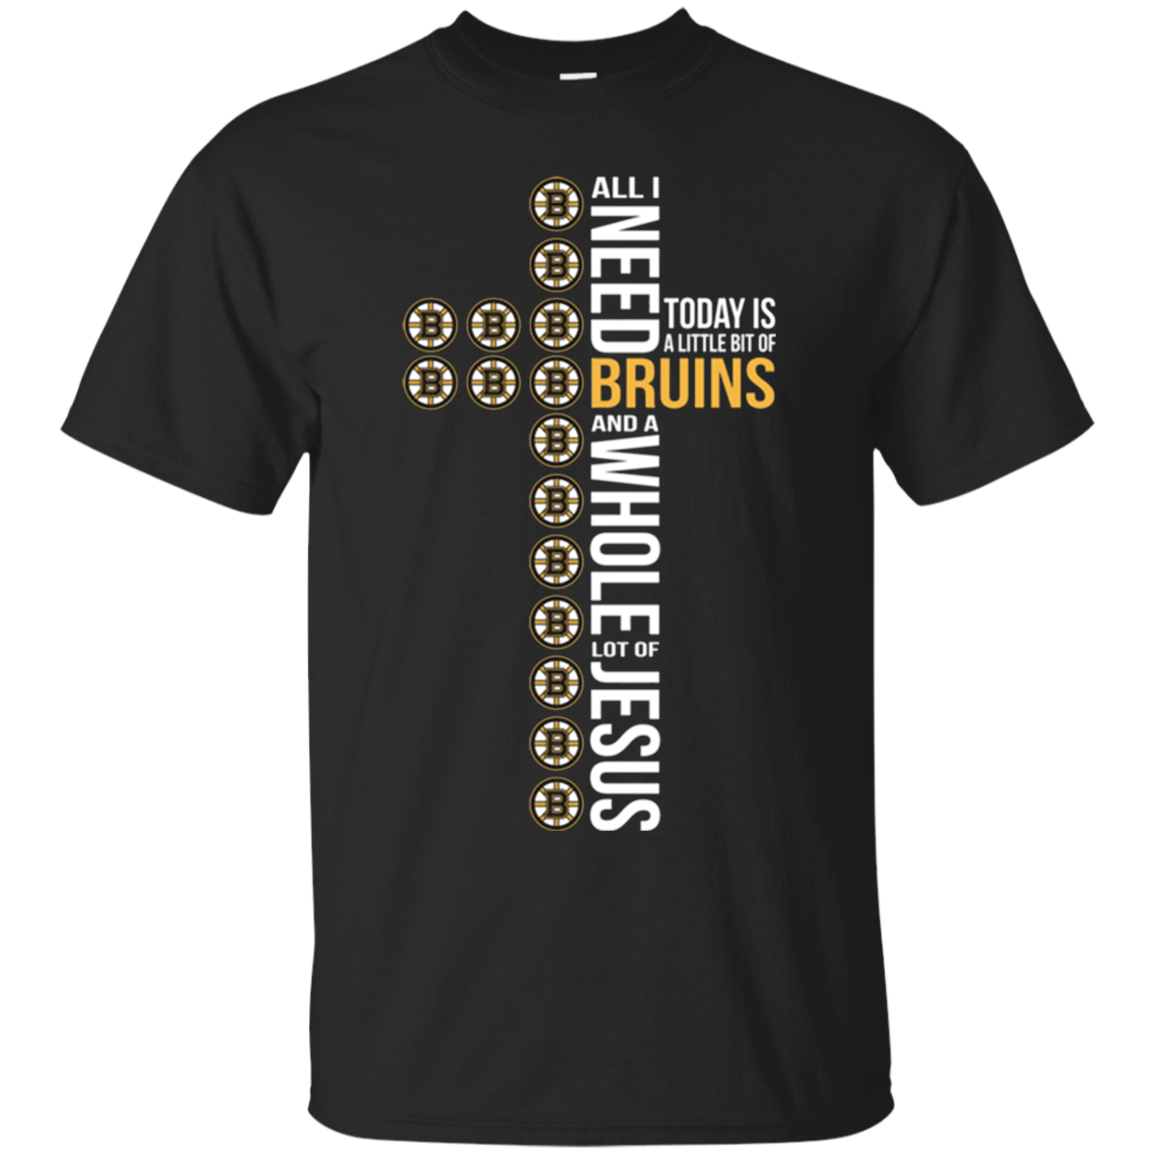 All I Need Today Is A Little Bit Of Boston Bruins Hockey And A Whole Lot Of Jesus T - Shirt For 